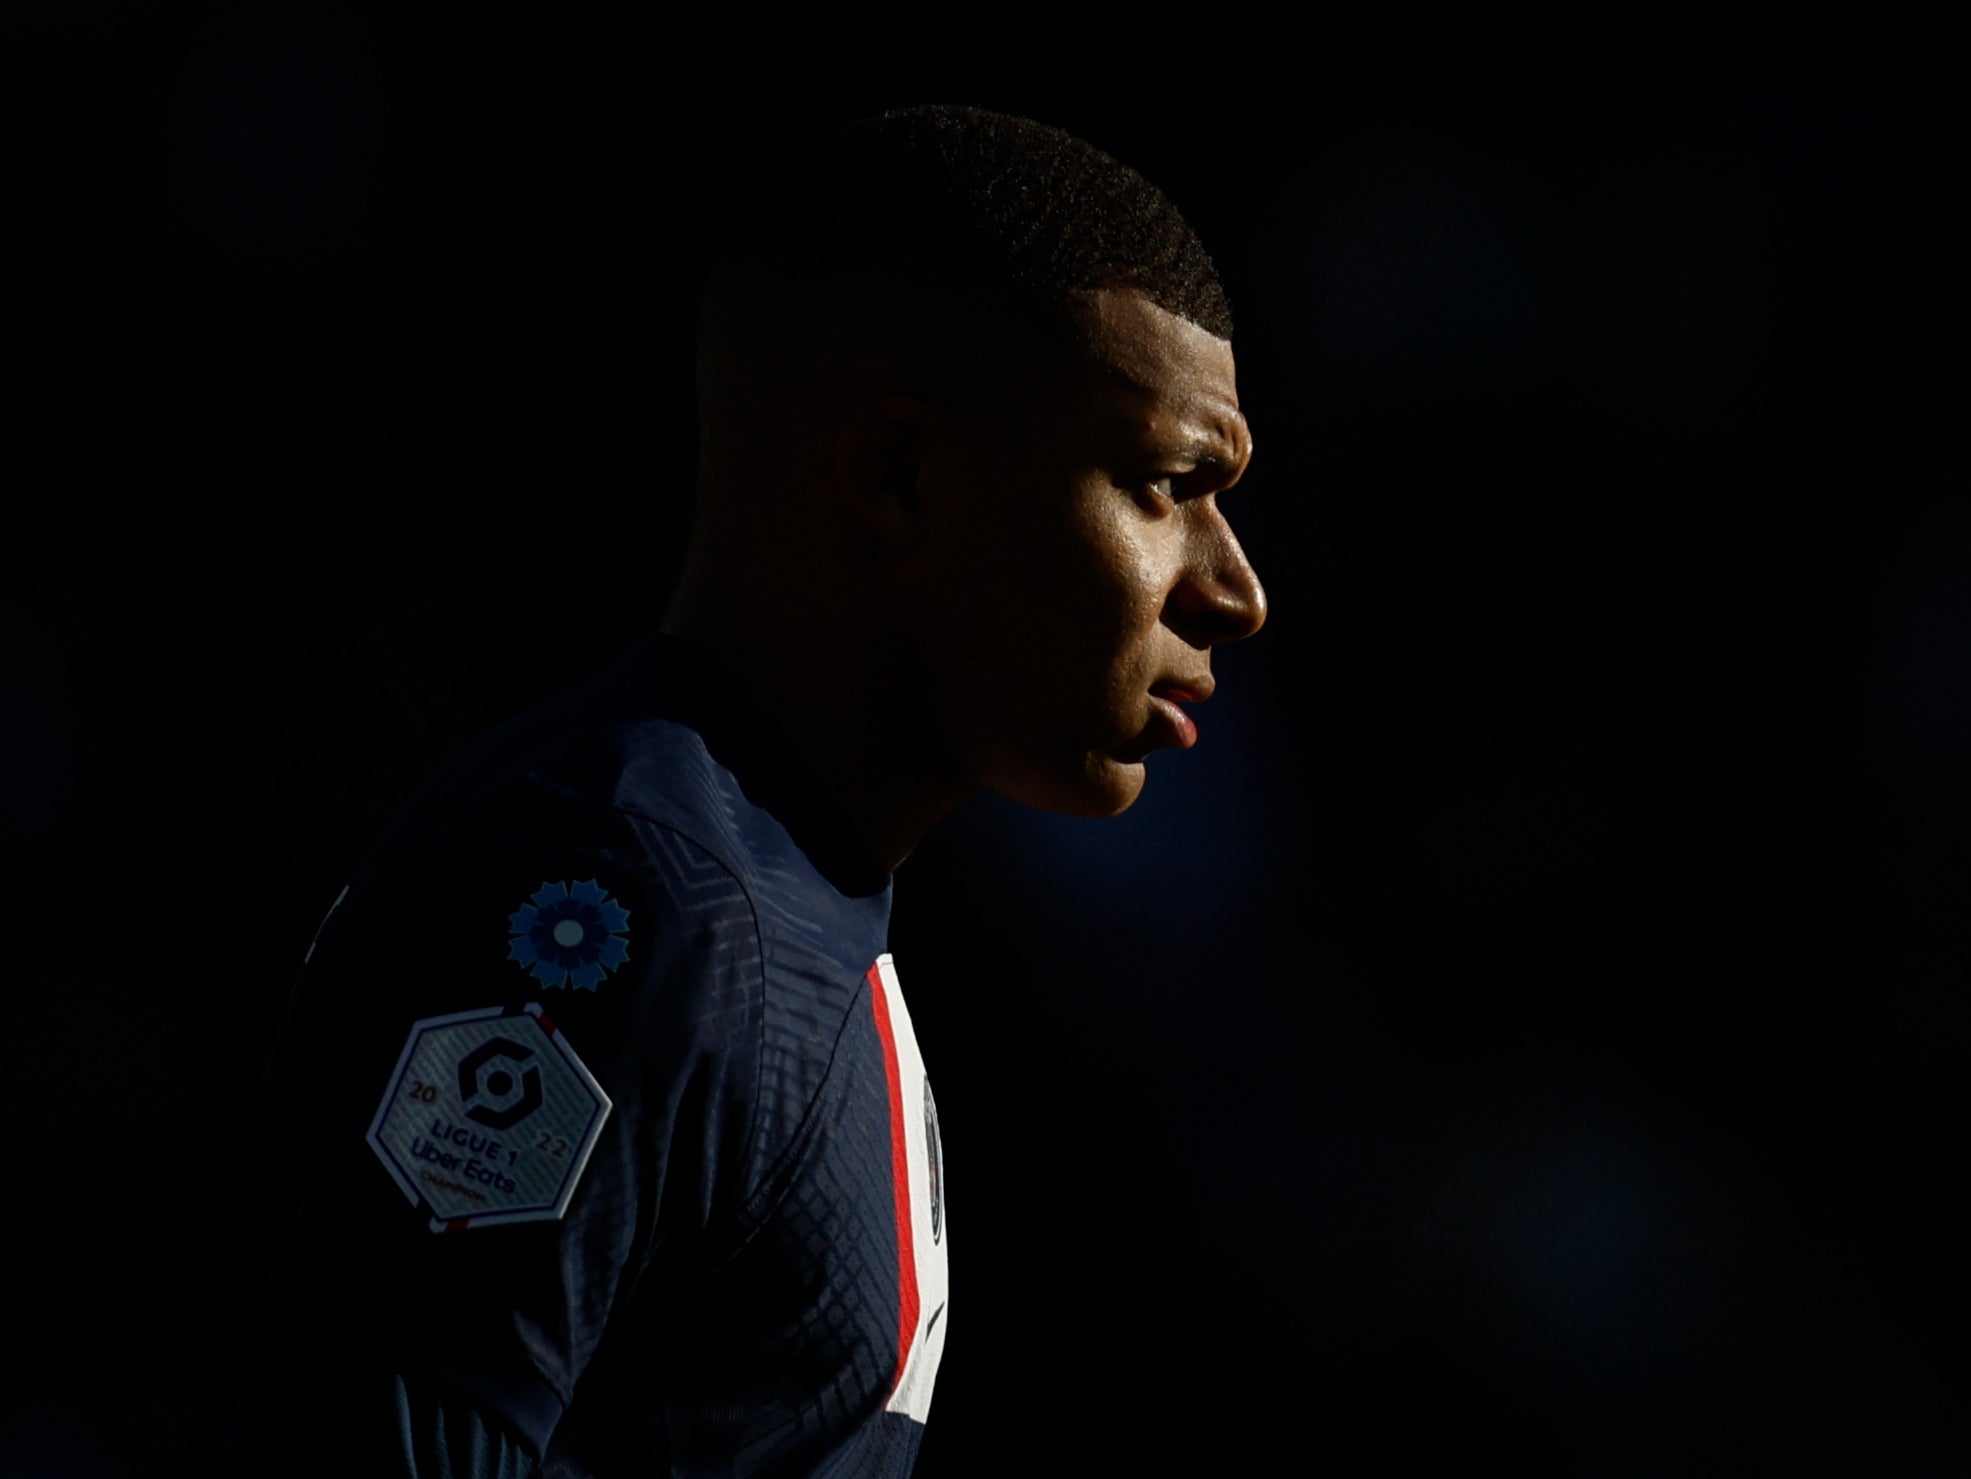 World Cup star Kylian Mbappe appearing for Paris St Germain in November